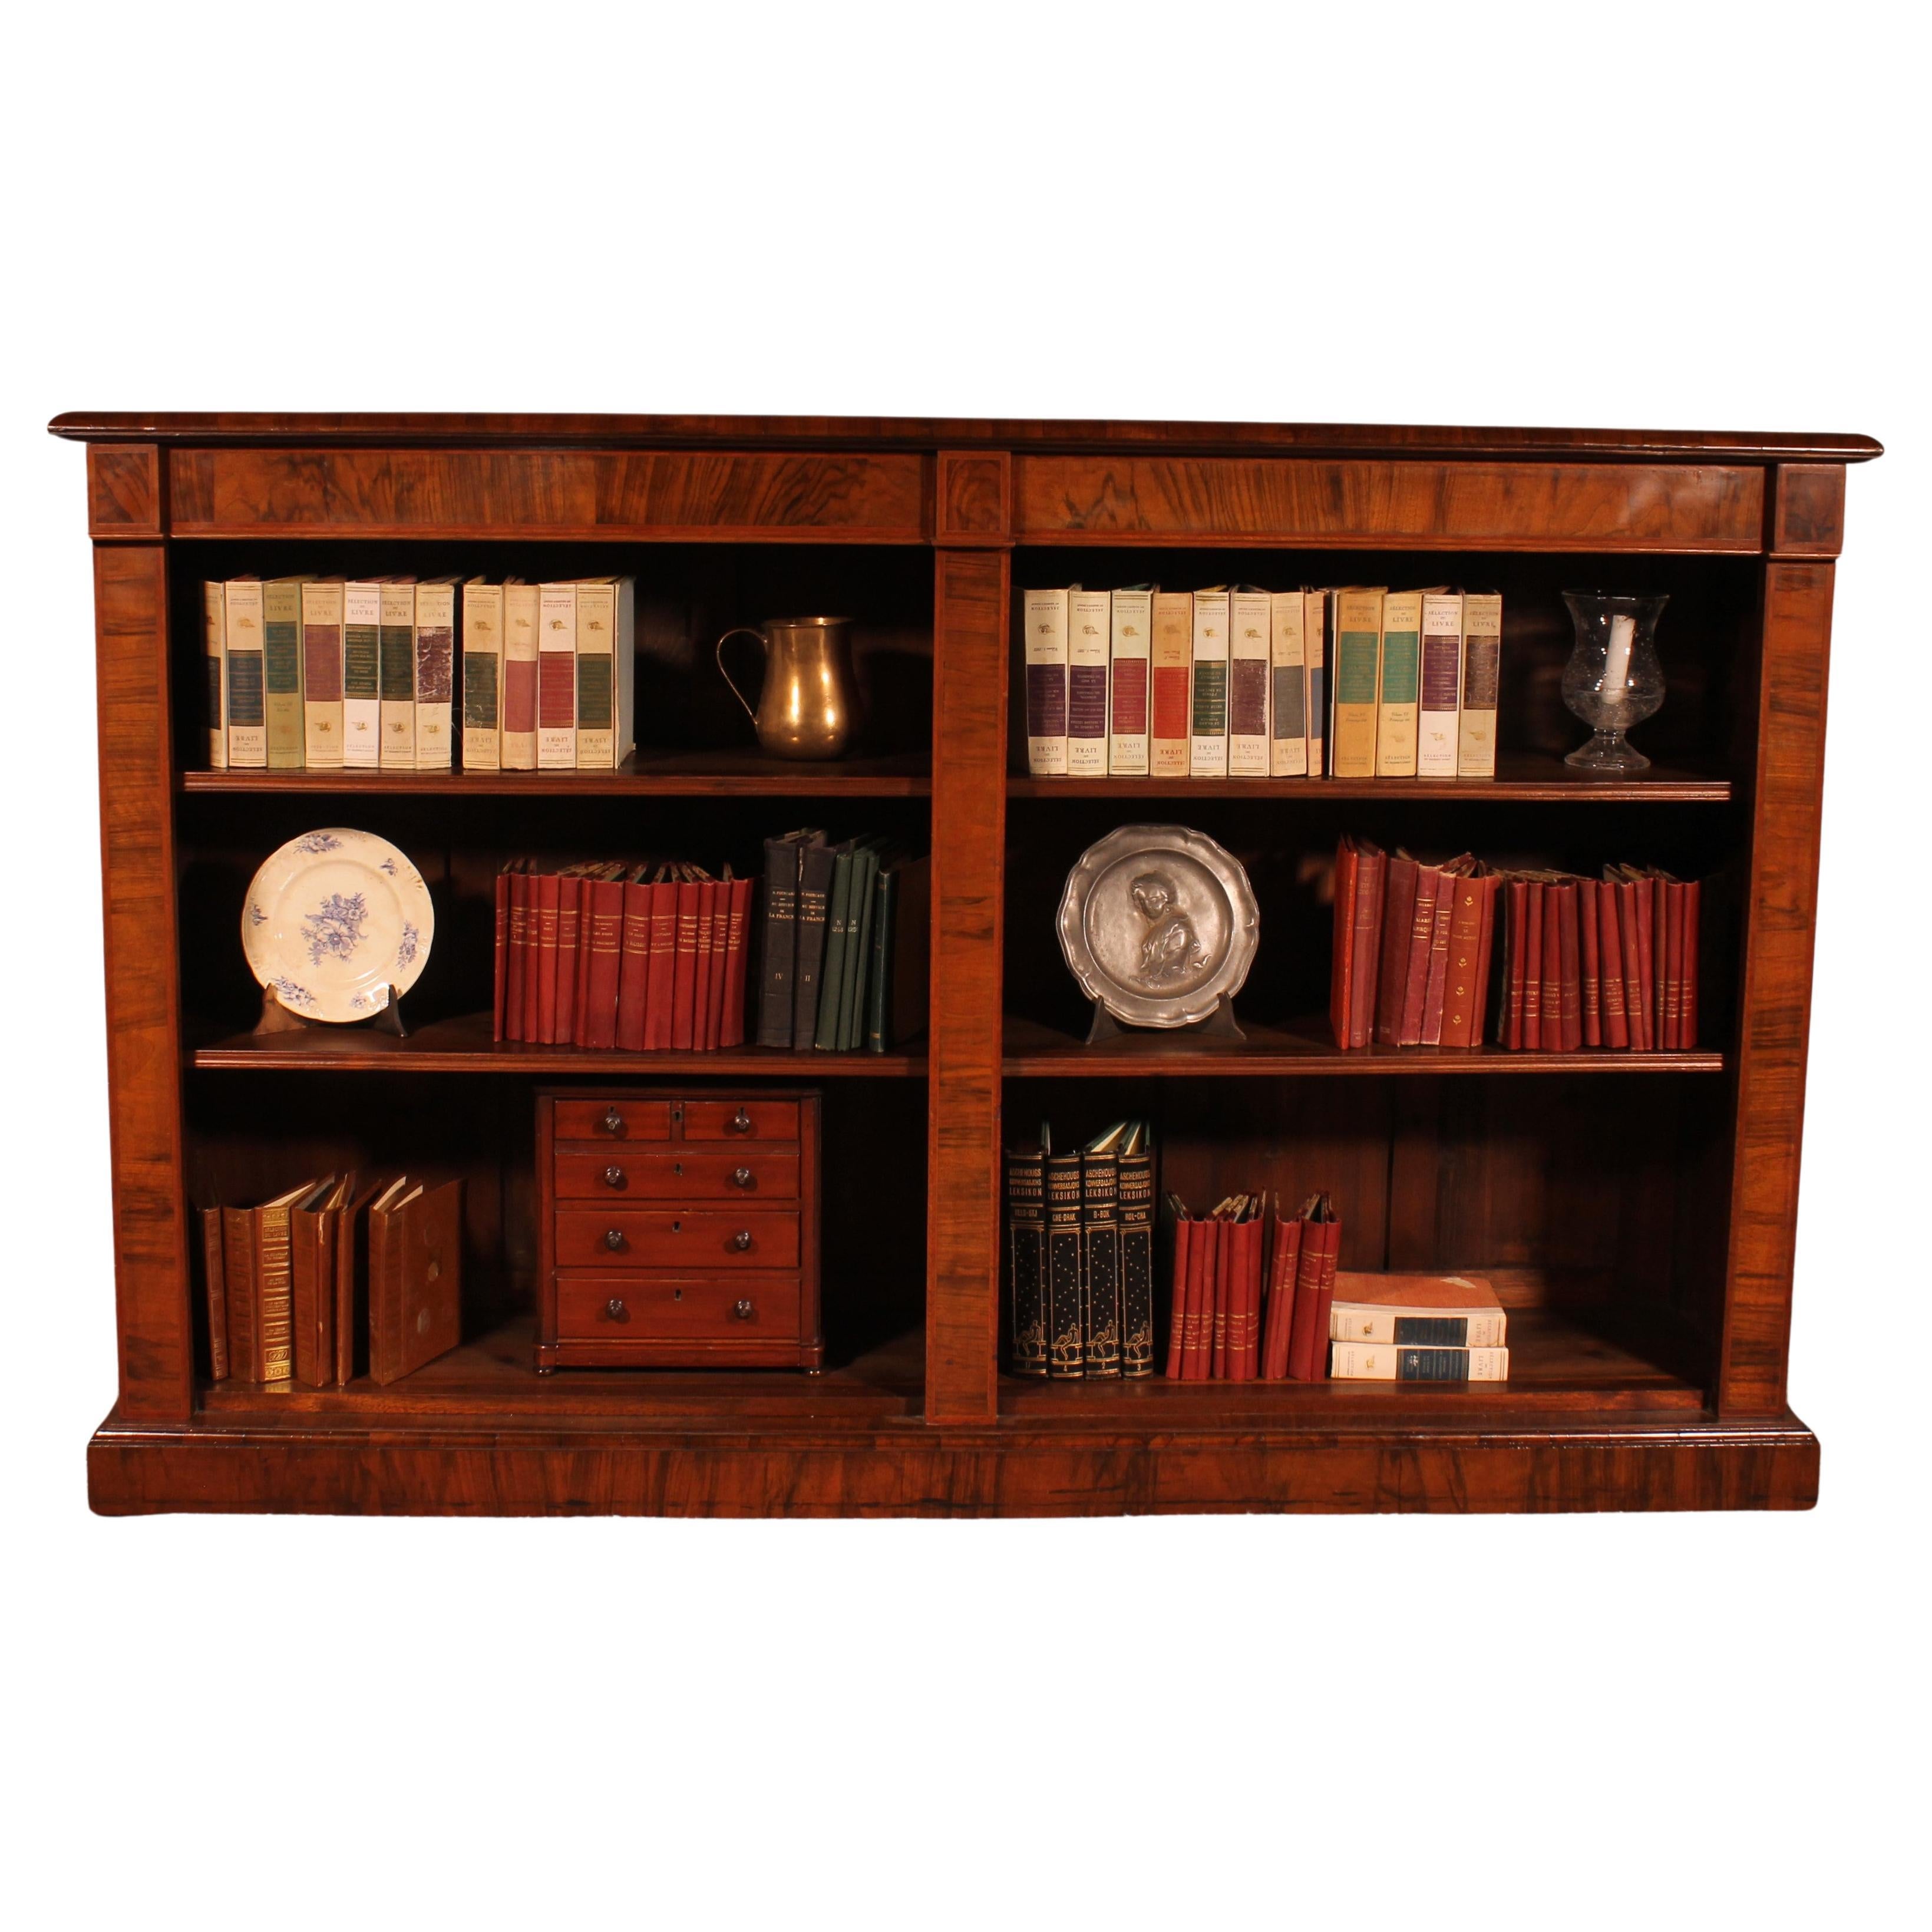 Large Open Bookcase In Walnut And Inlays From The 19th Century